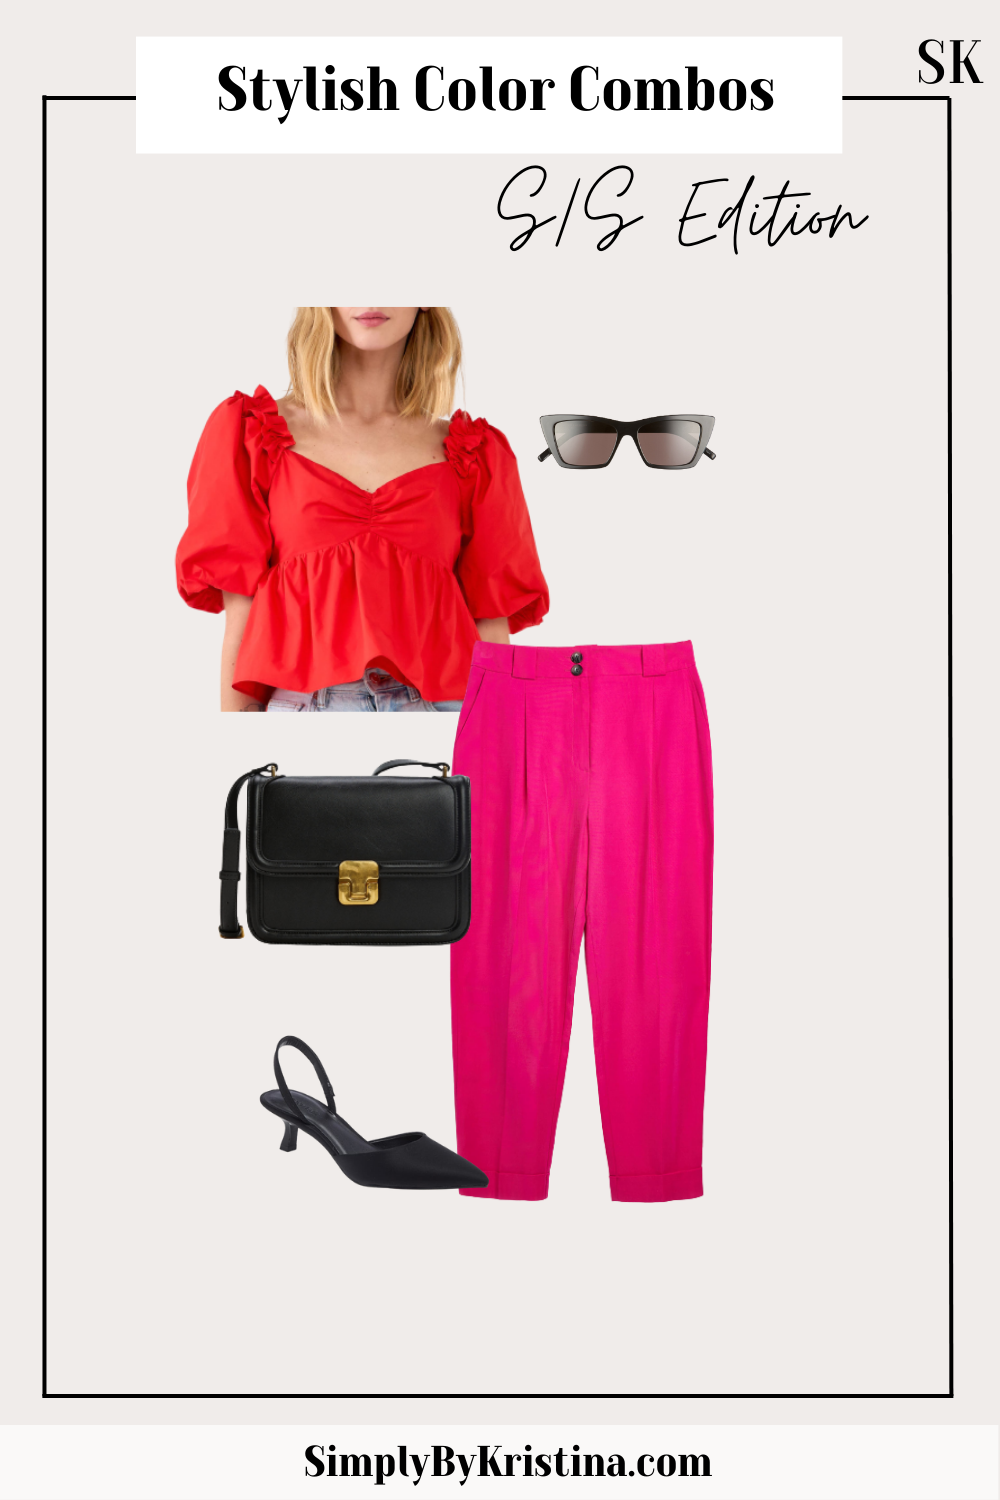 TRENDING COLORS THAT GO TOGETHER FOR SPRING